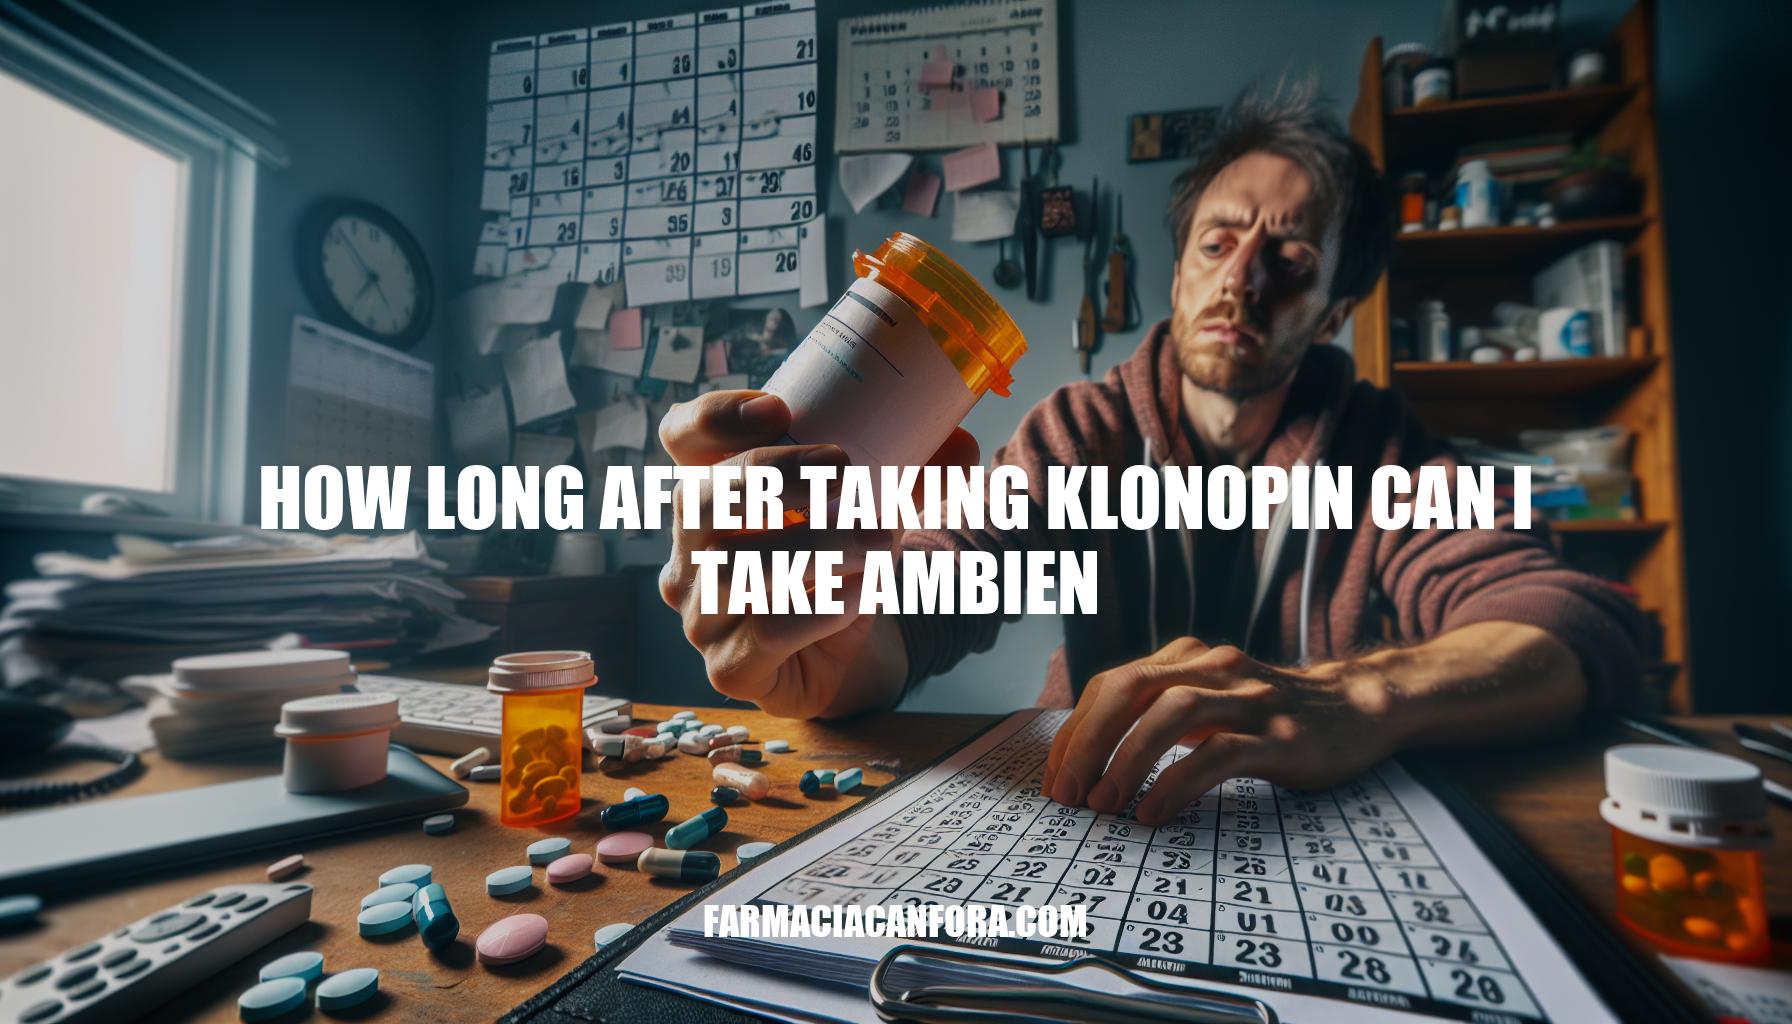 How Long After Taking Klonopin Can I Take Ambien: Guidelines and Considerations